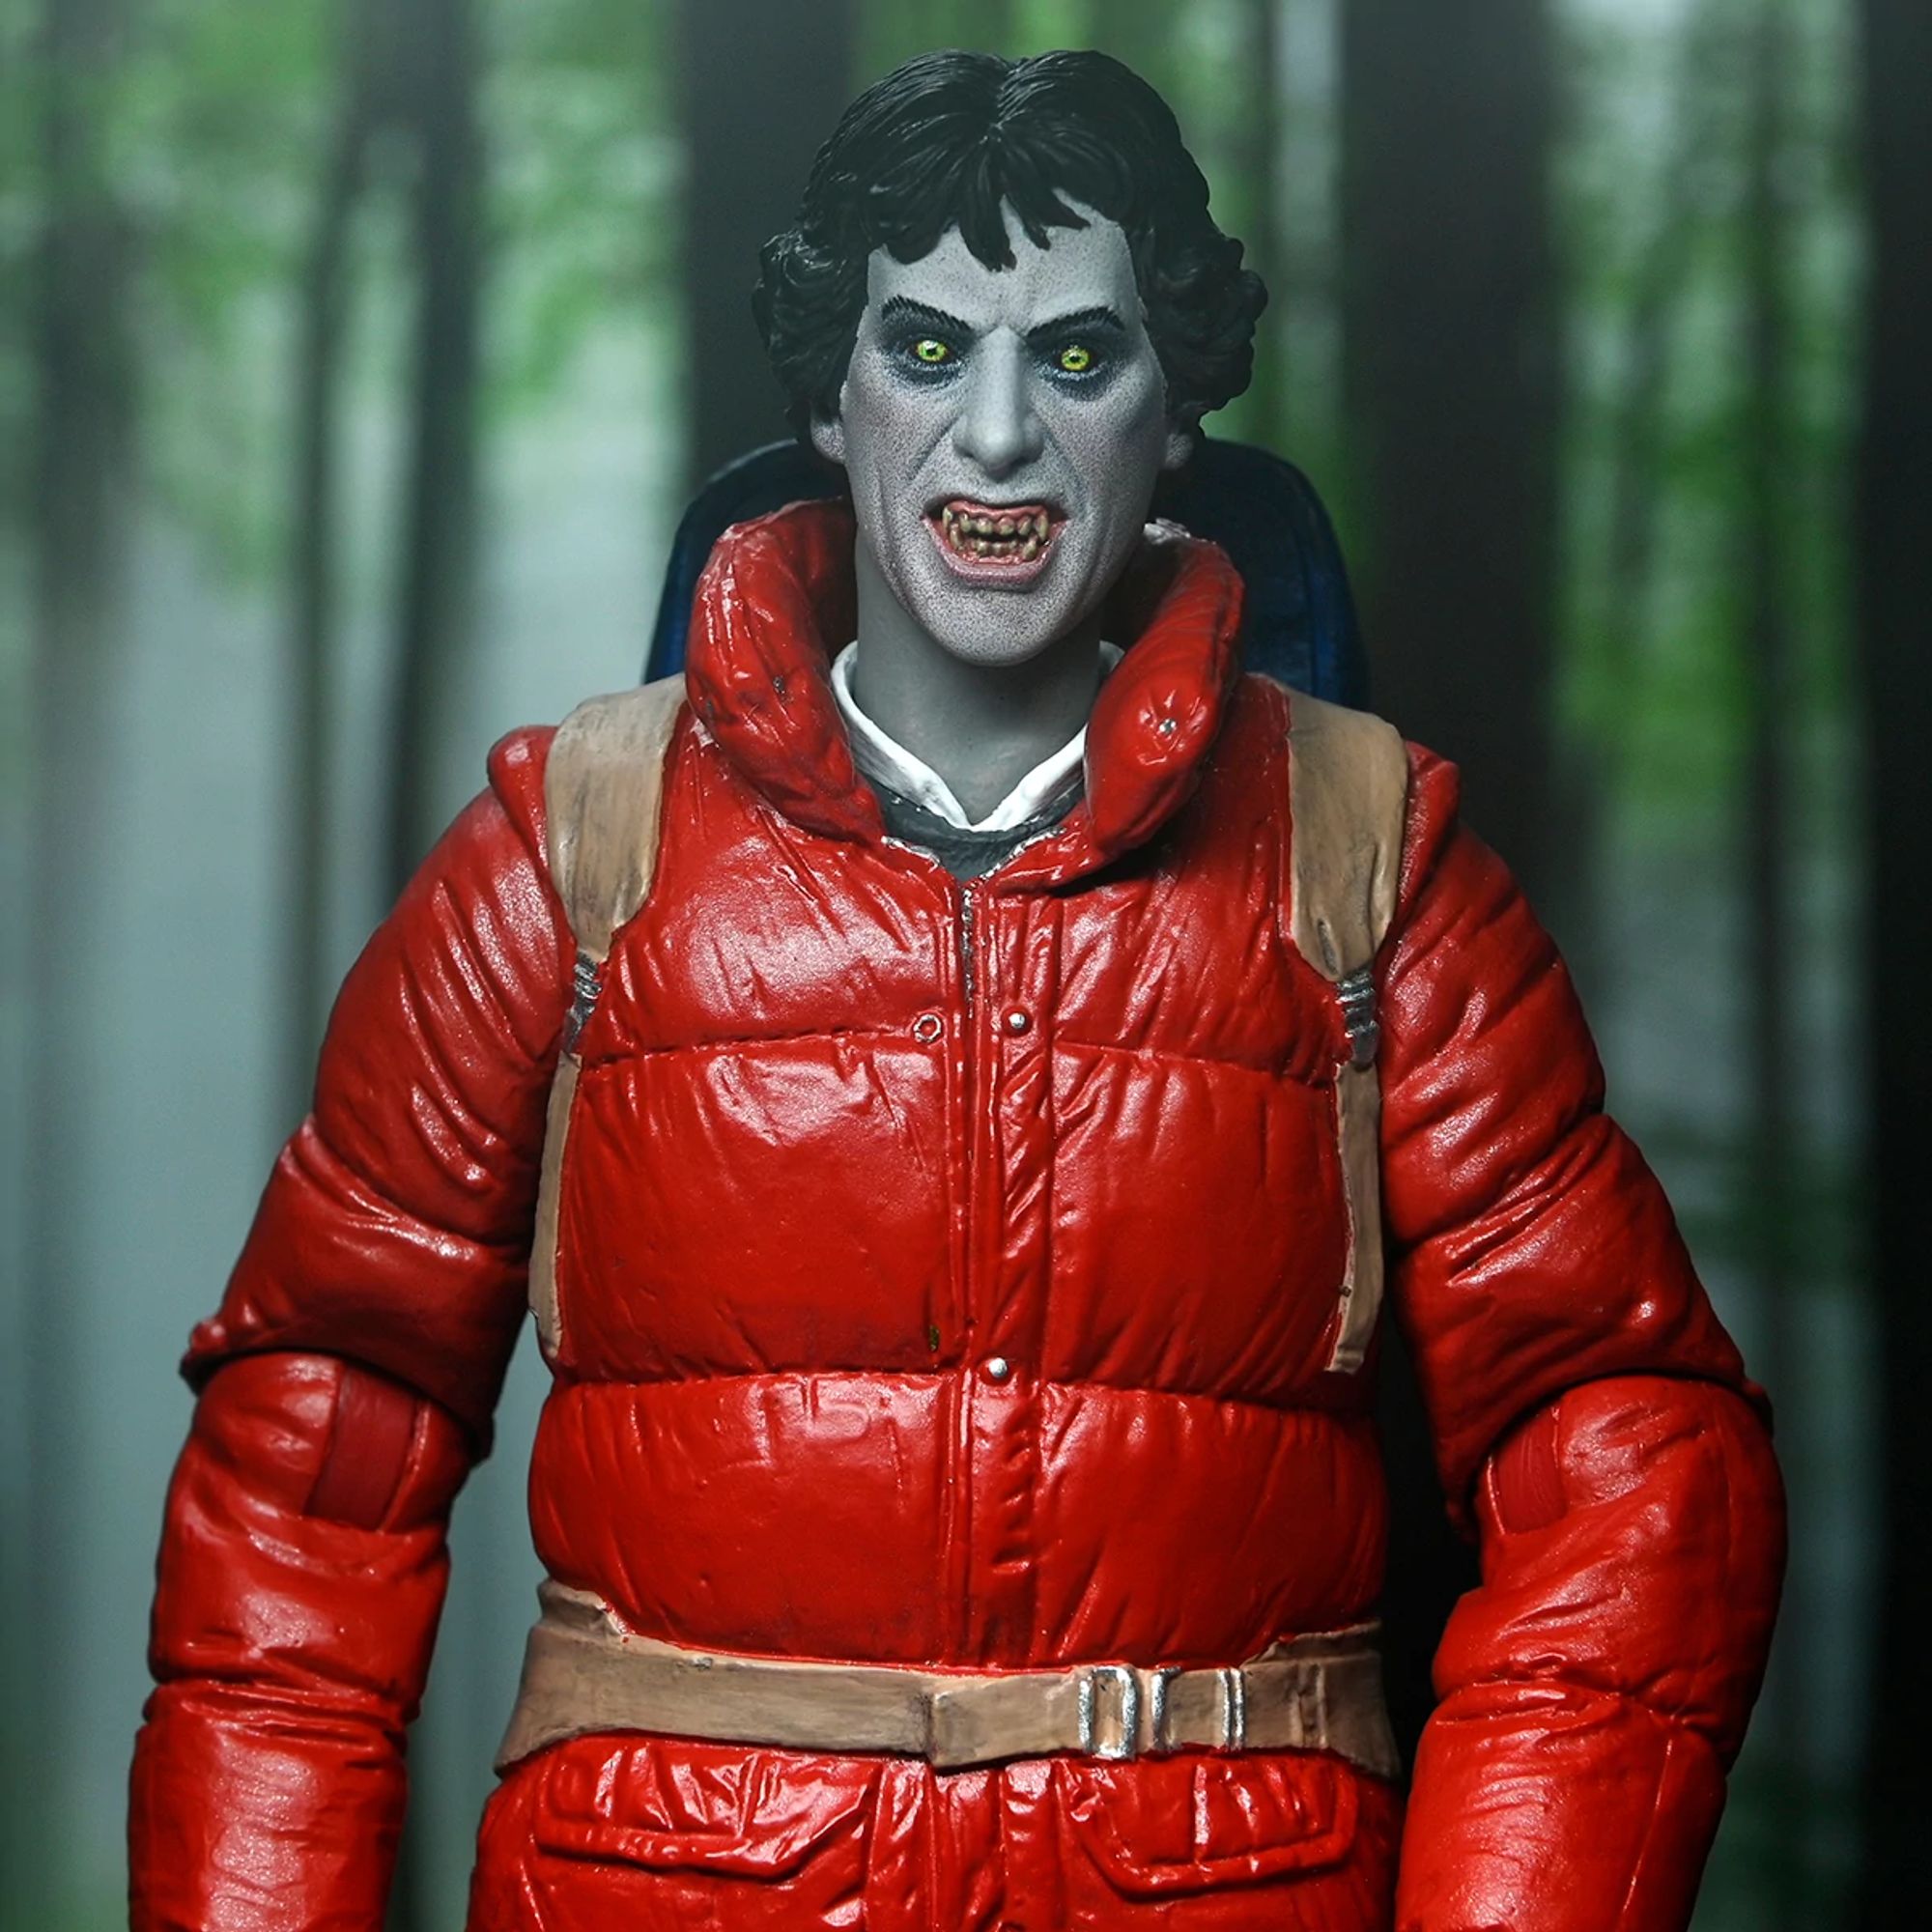 AN AMERICAN WEREWOLF IN LONDON – 7” SCALE ACTION FIGURES - JACK AND DAVID 2 PACK